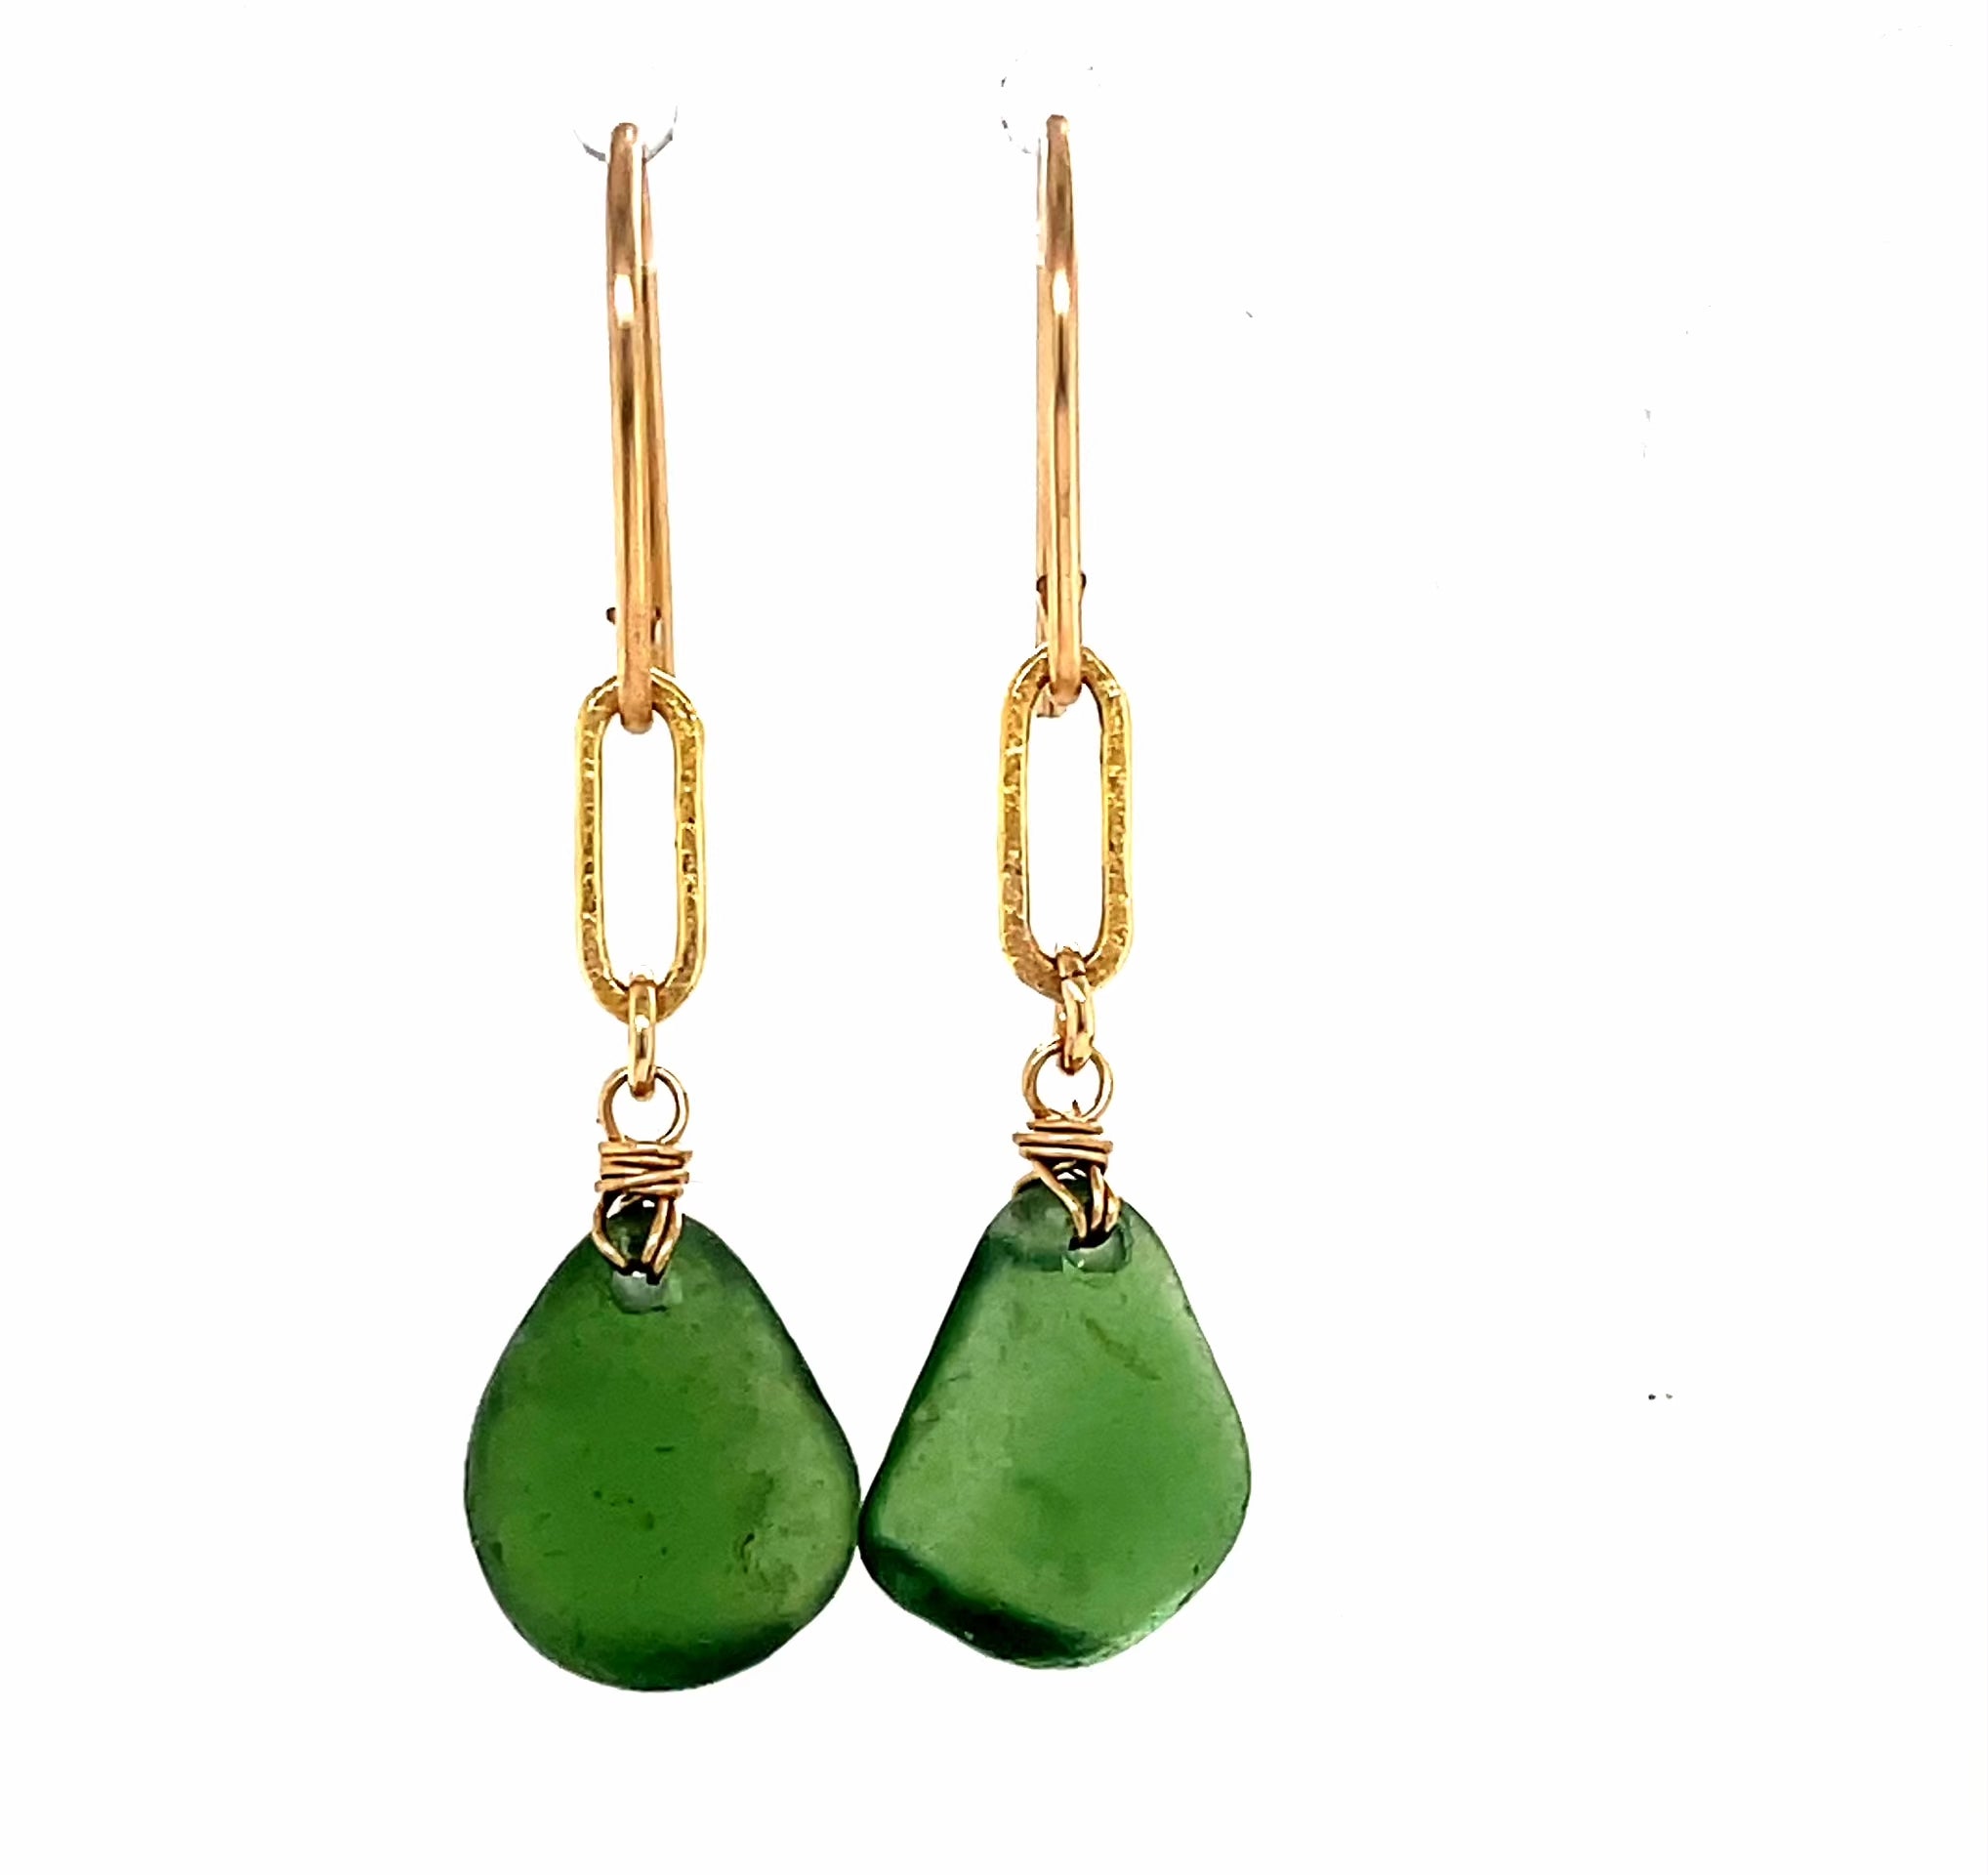 Minimalist green glass earrings in a sleek rectangle shape, complemented by matte gold details